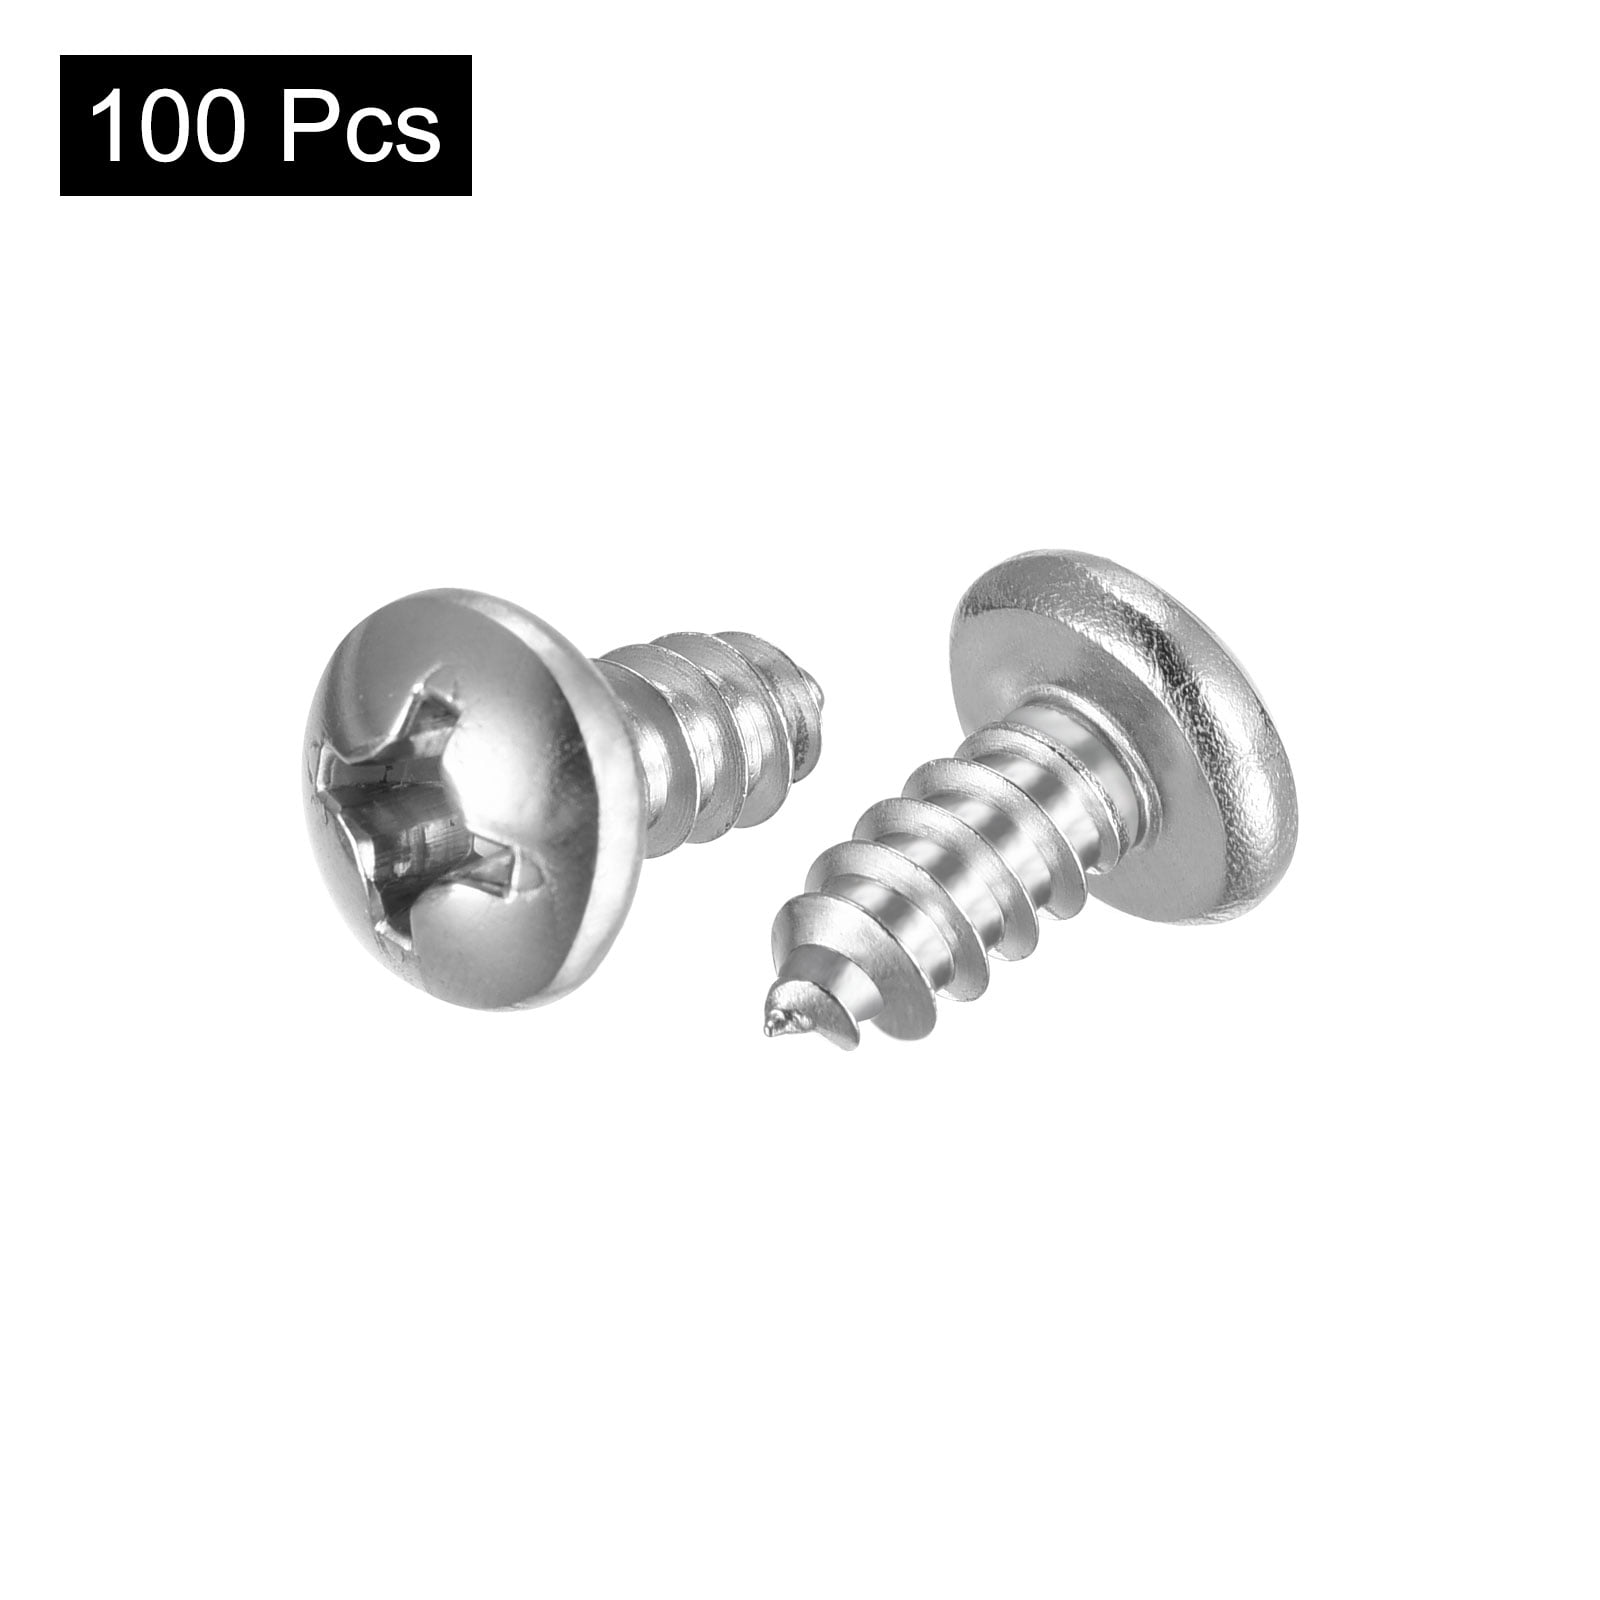 8 x 1 3/16-Inch Wood Screws Carbon Steel Phillips Self Tapping 200pcs -  Grey - Bed Bath & Beyond - 36114642